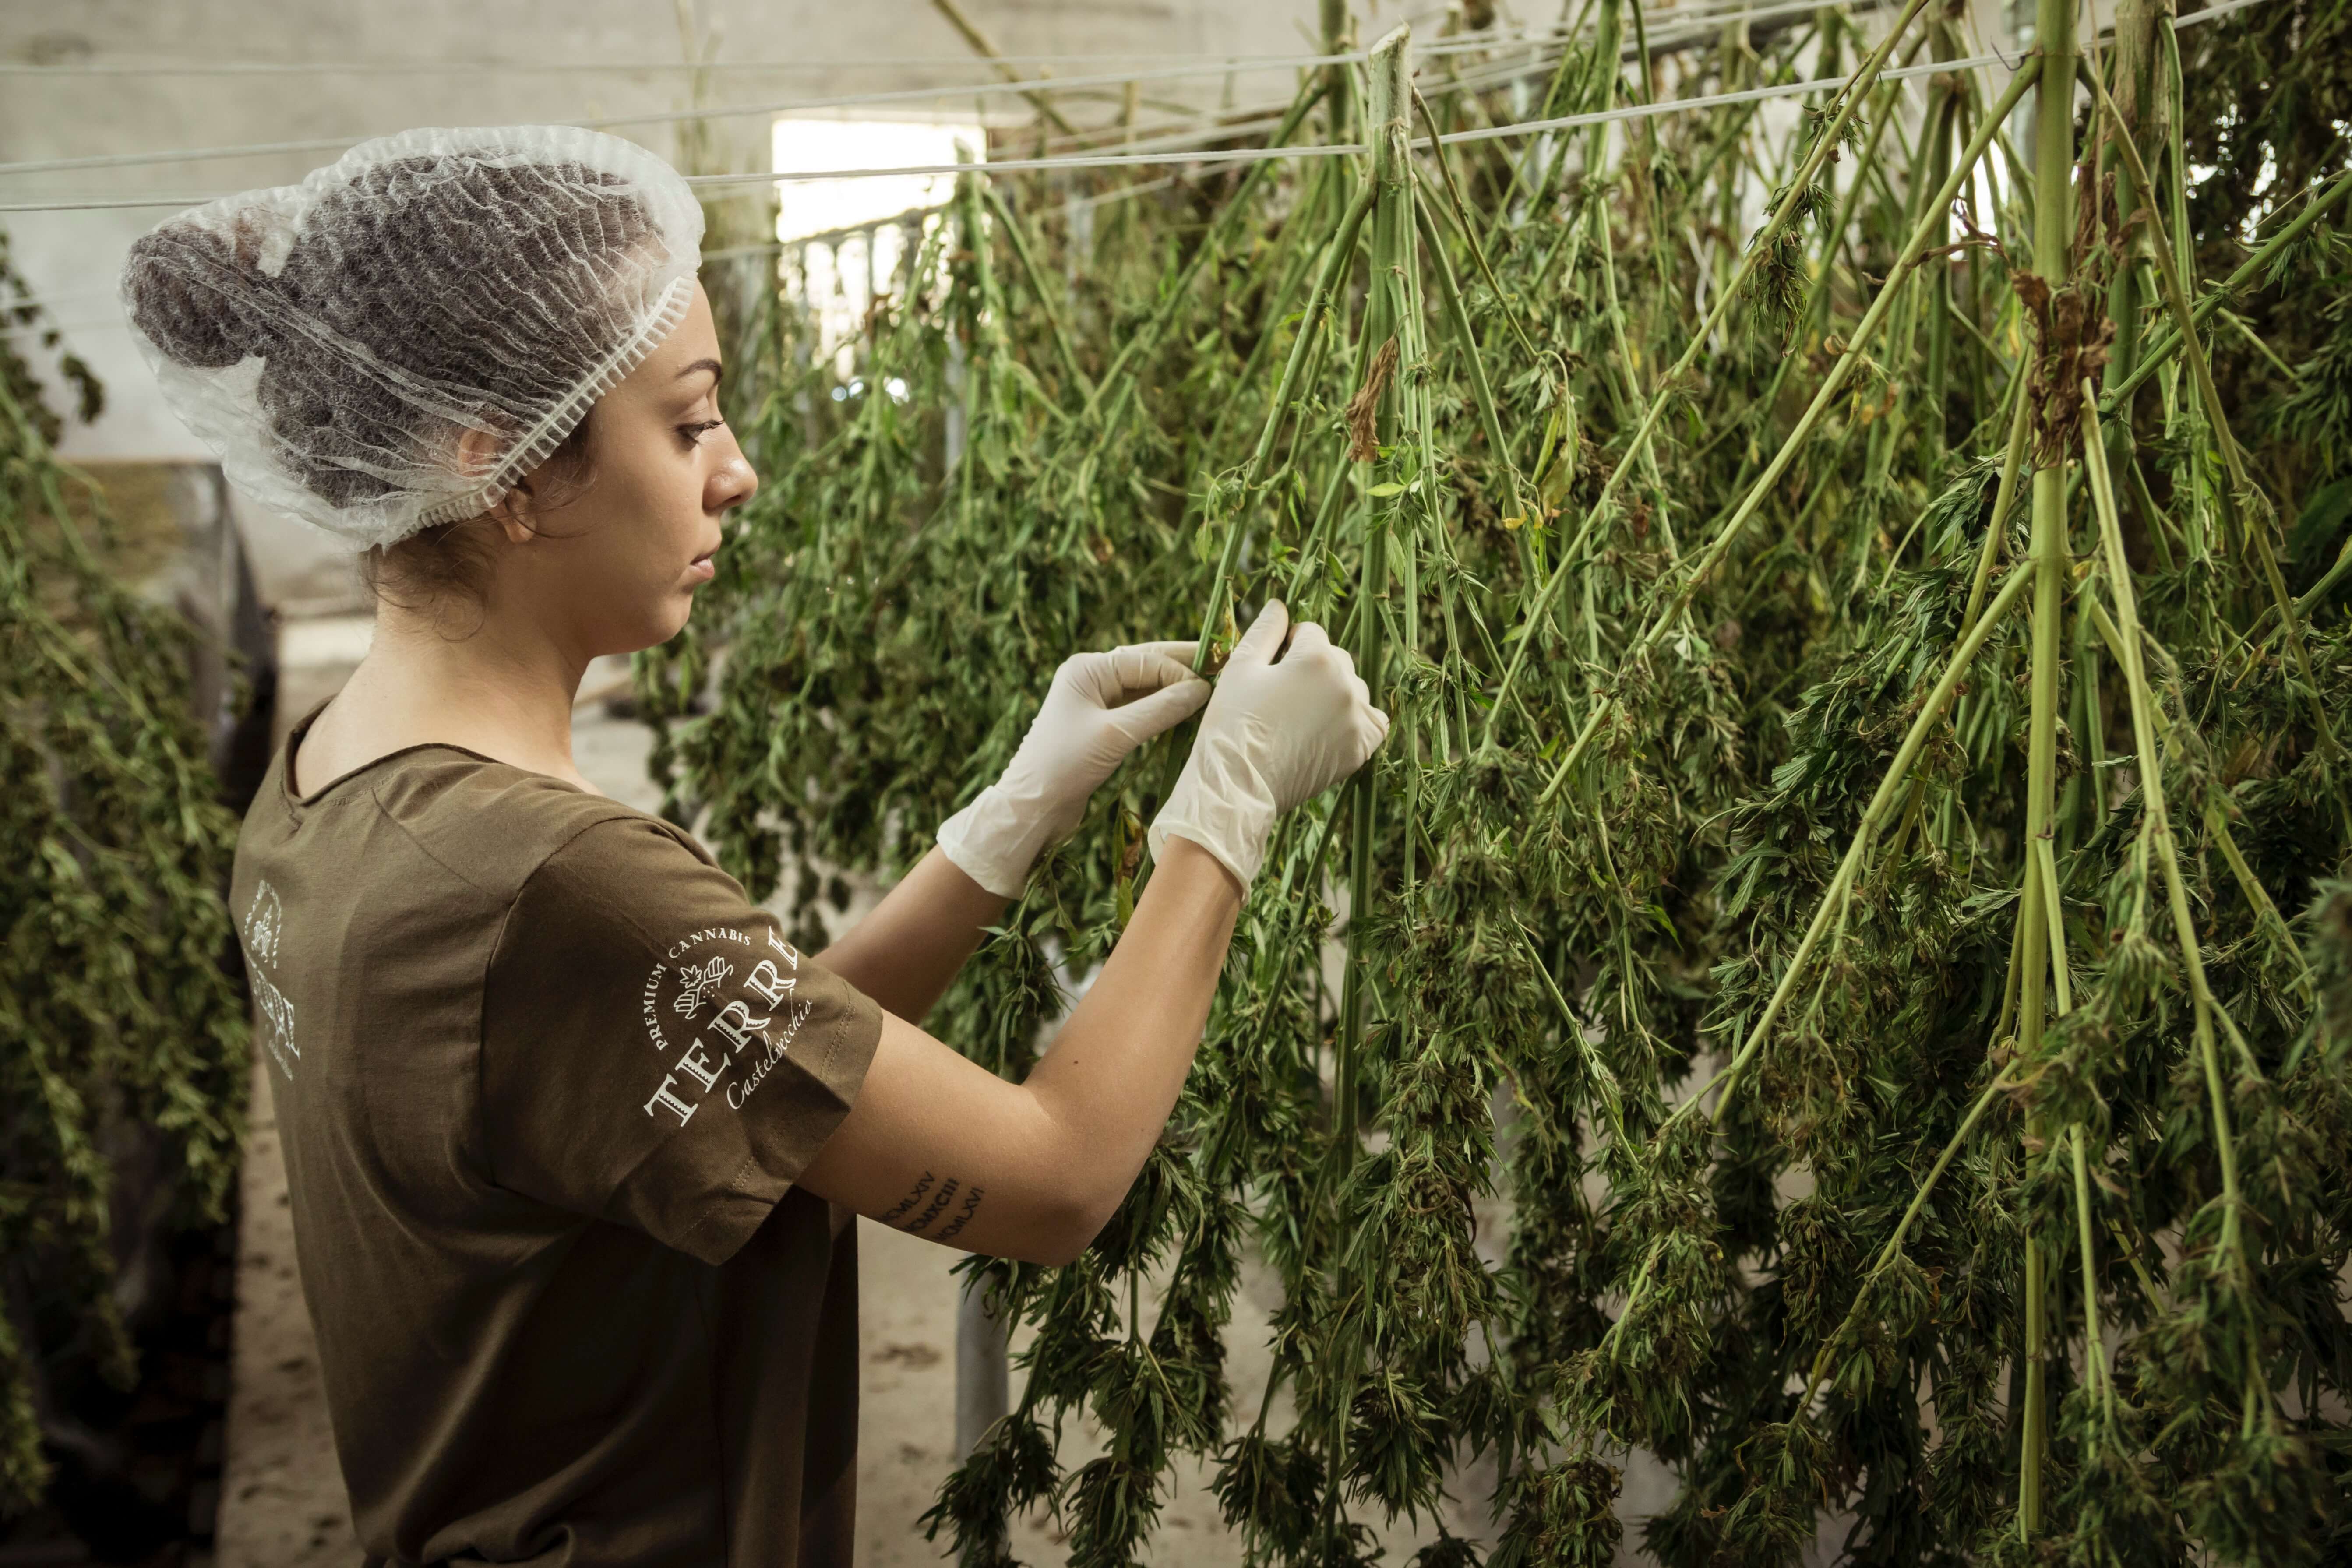 A cannabis facility worker hangs up plants to dry. (@TerrediCannabis/Unsplash)